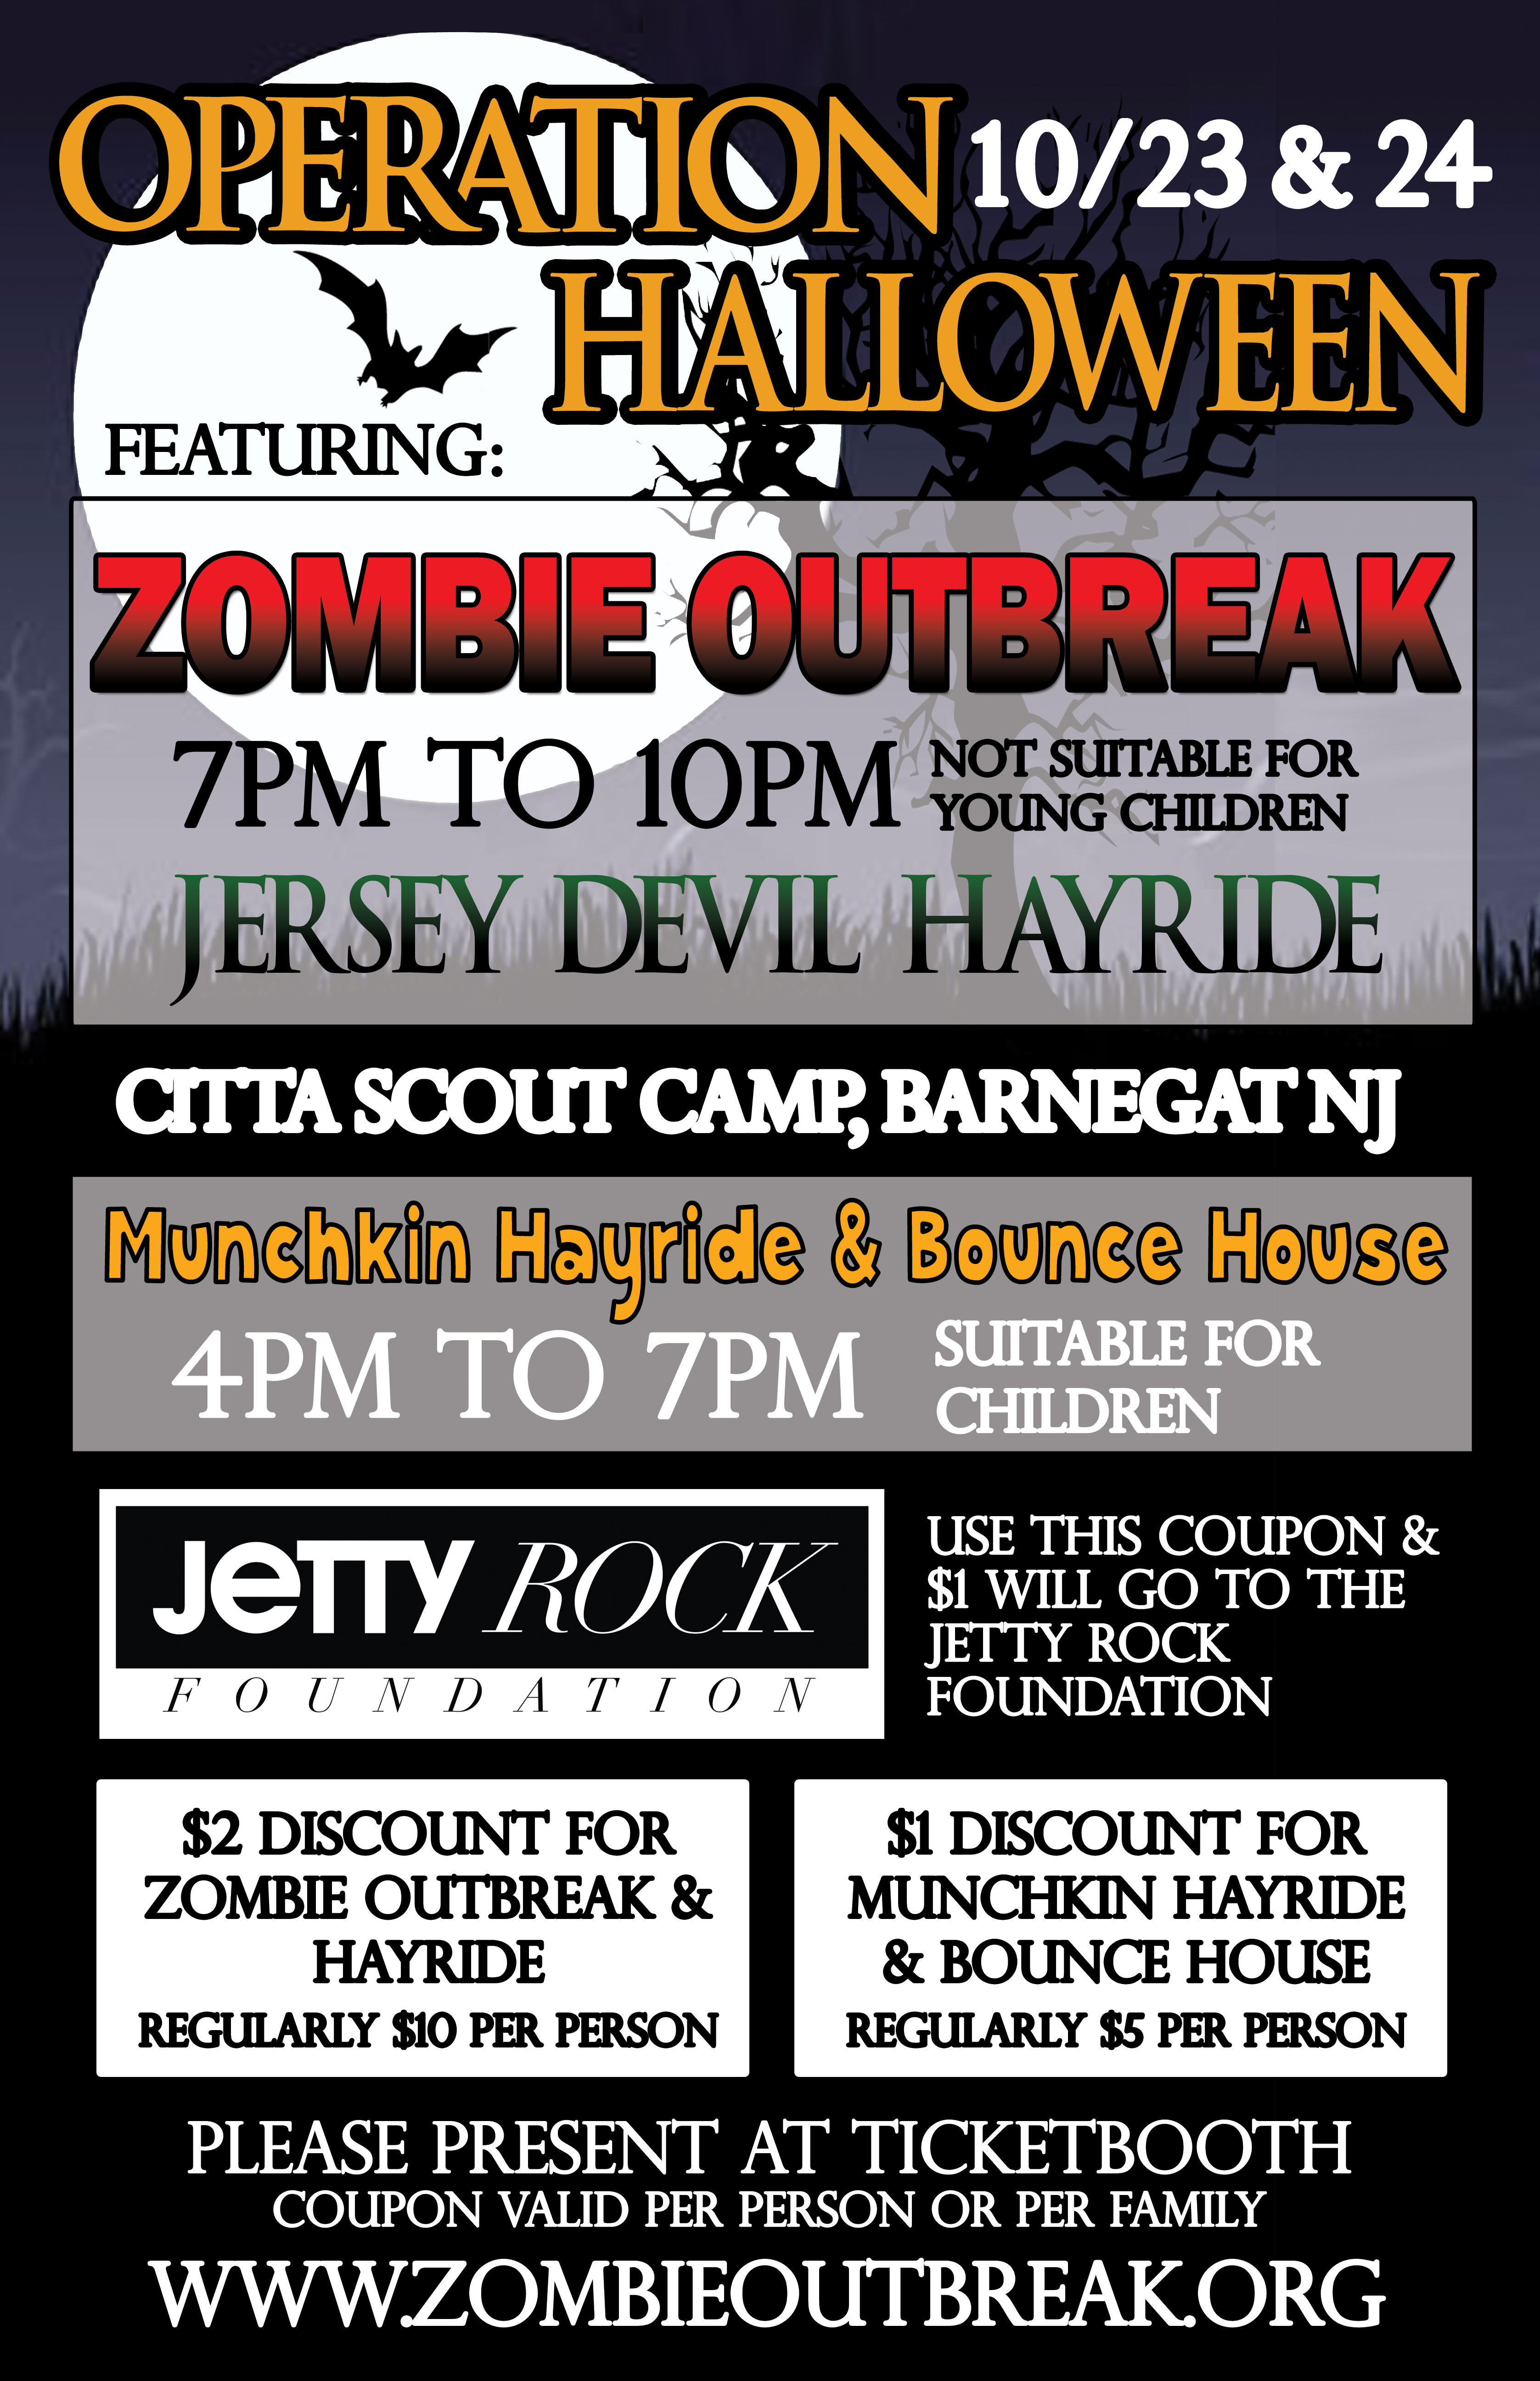 Operation Halloween featuring Zombie Outbreak coupon flyer